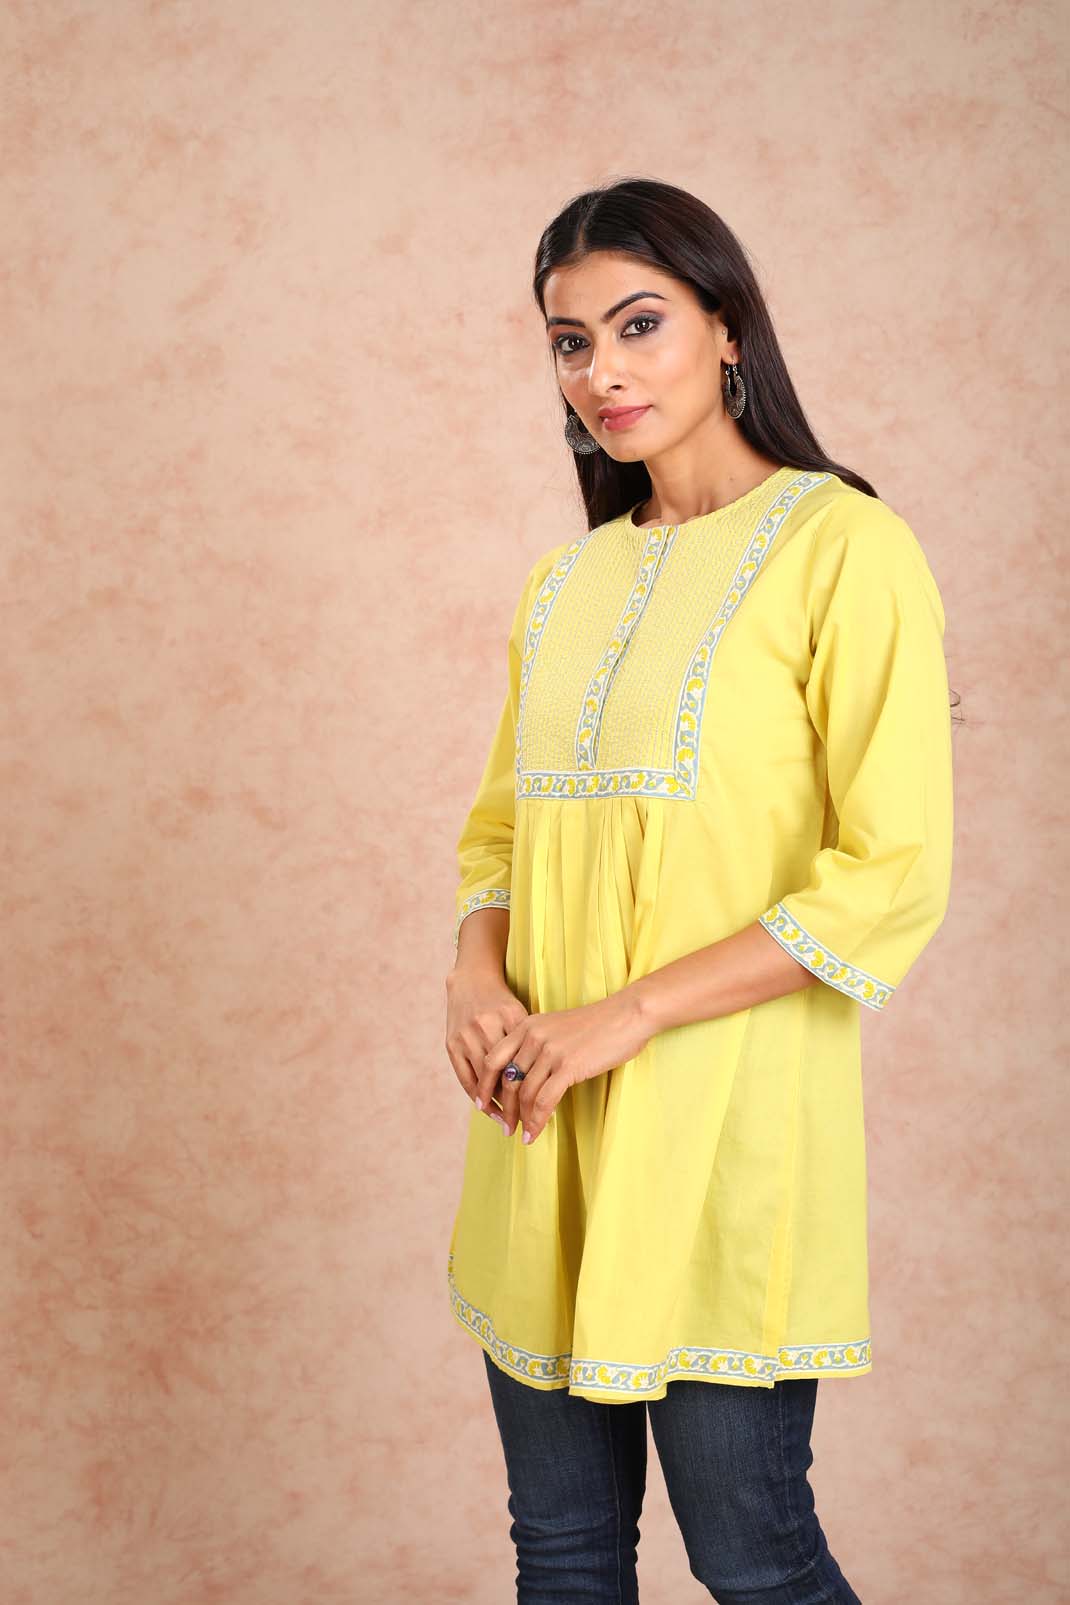 Cellery Tunic (Lime Yellow)